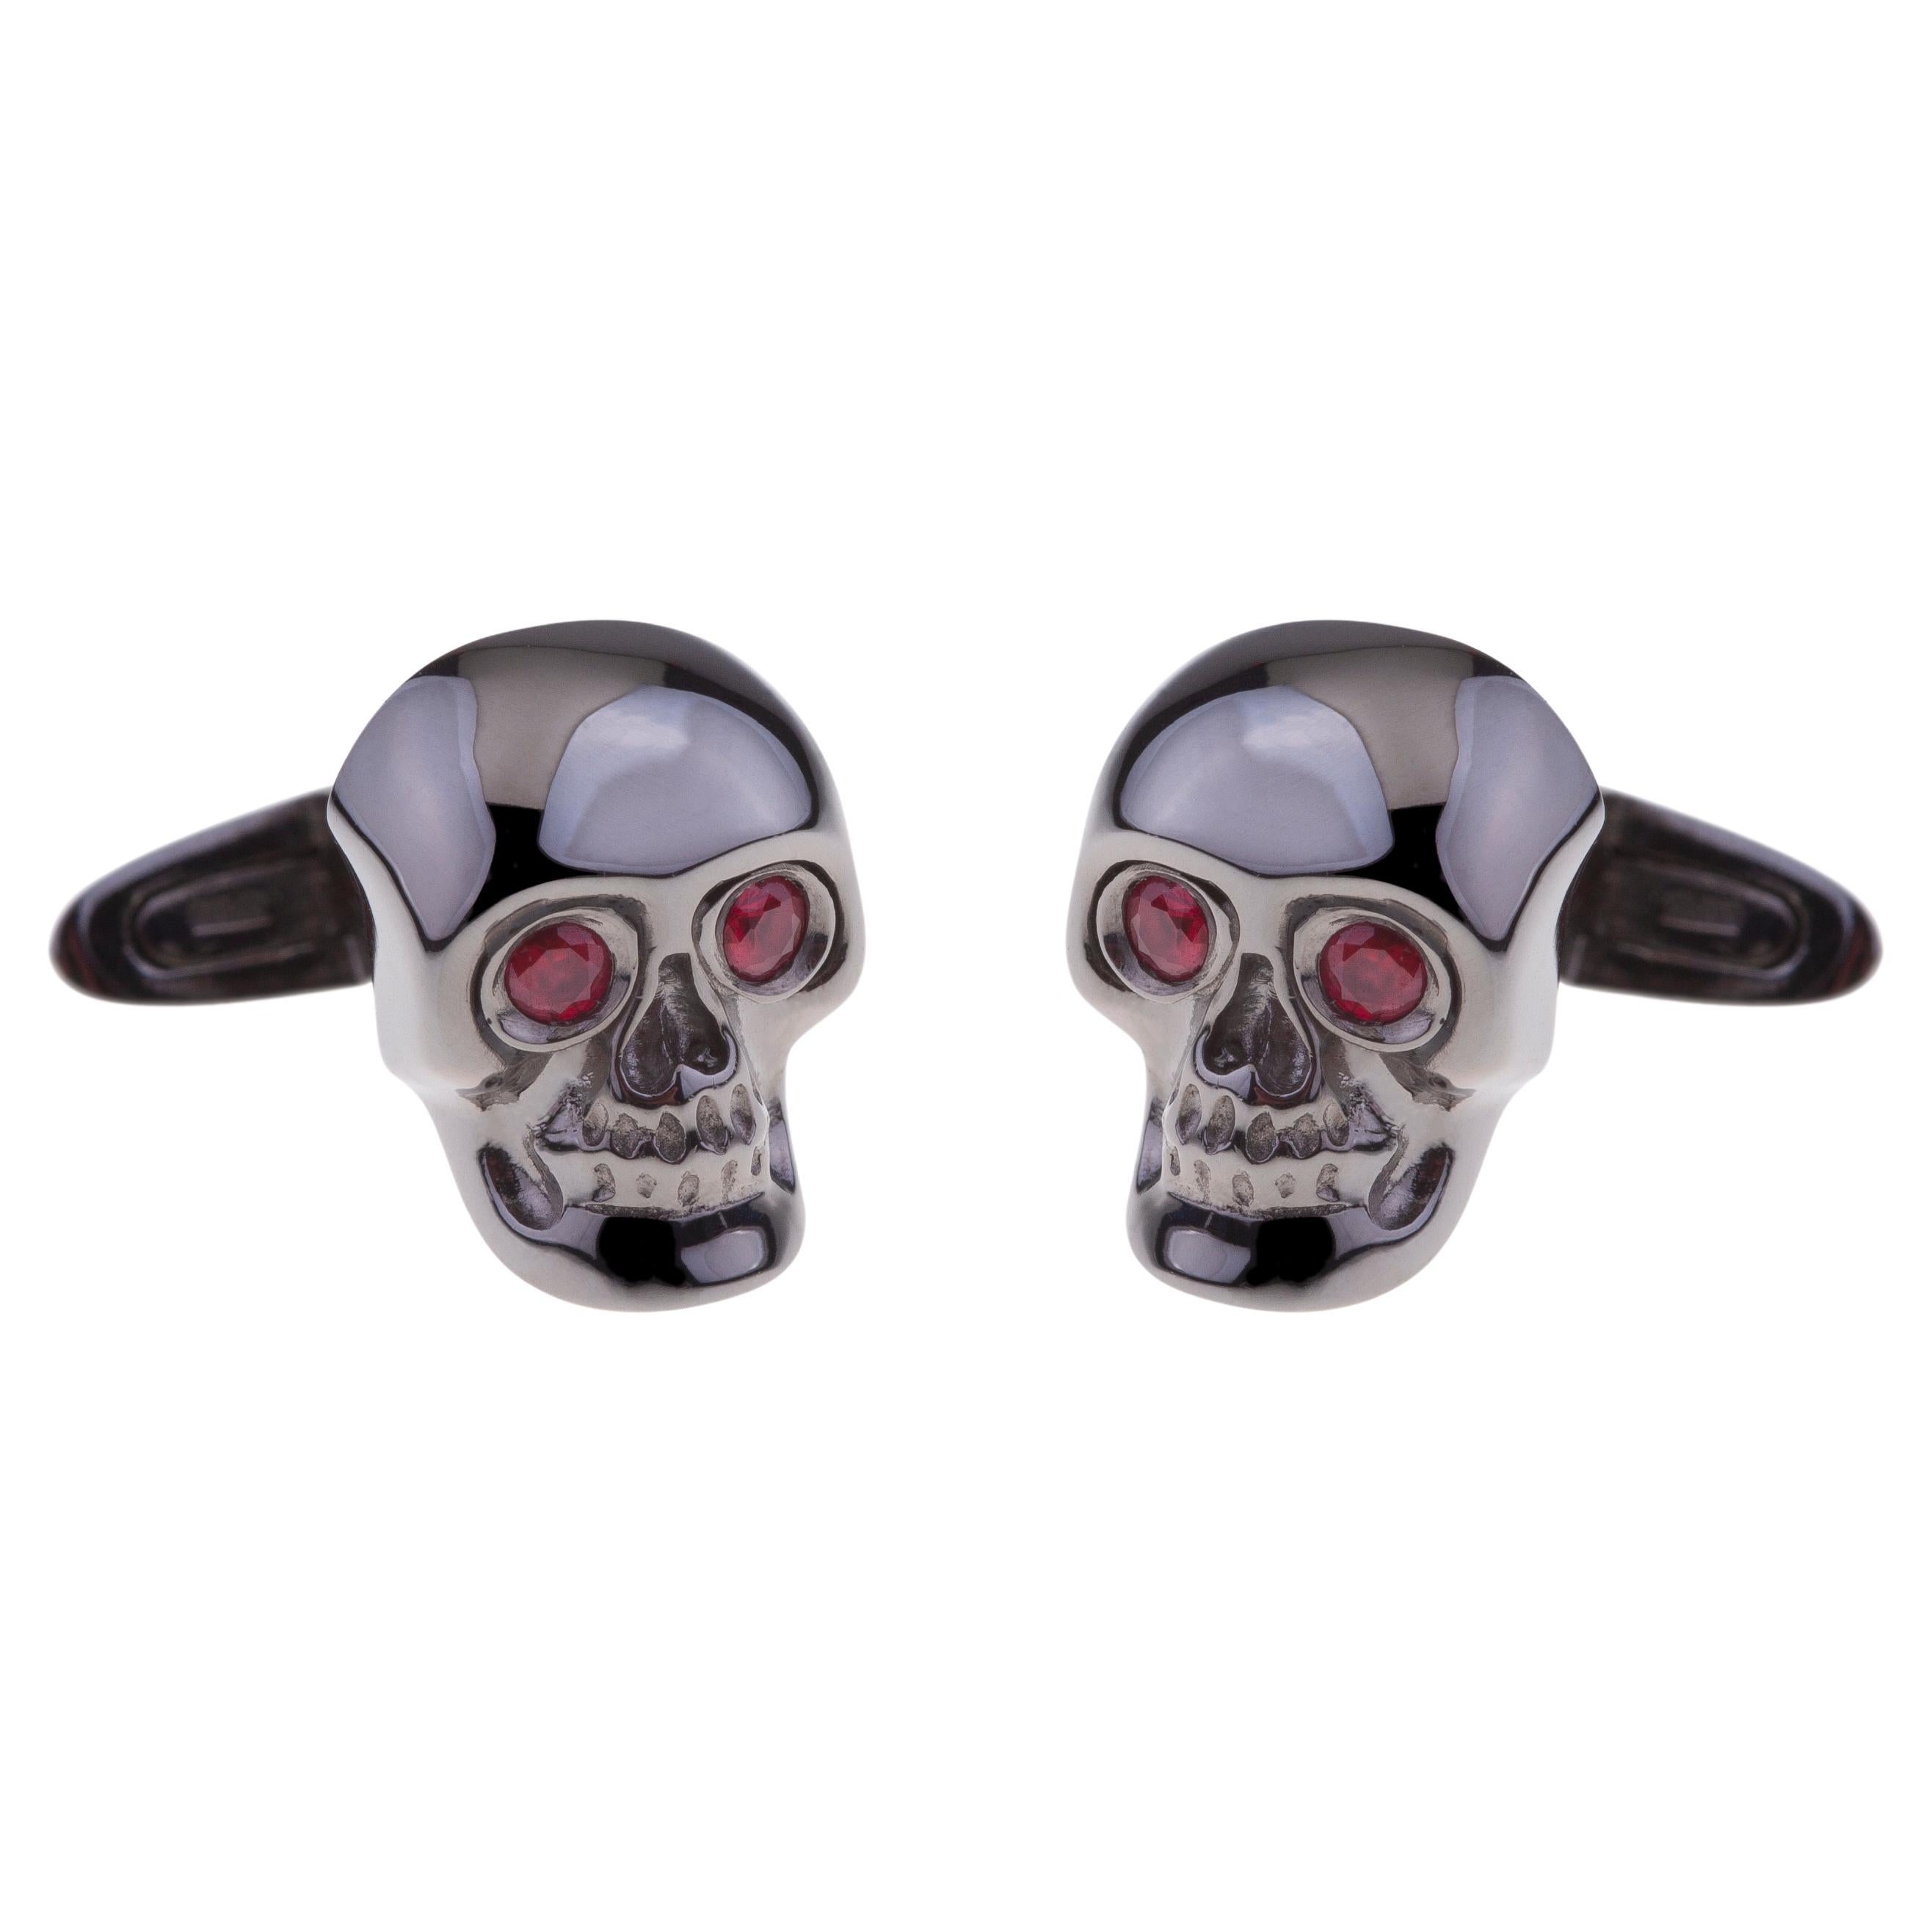 Cufflinks Black Gold from Gavello Featuring a Skull Head with Rubies